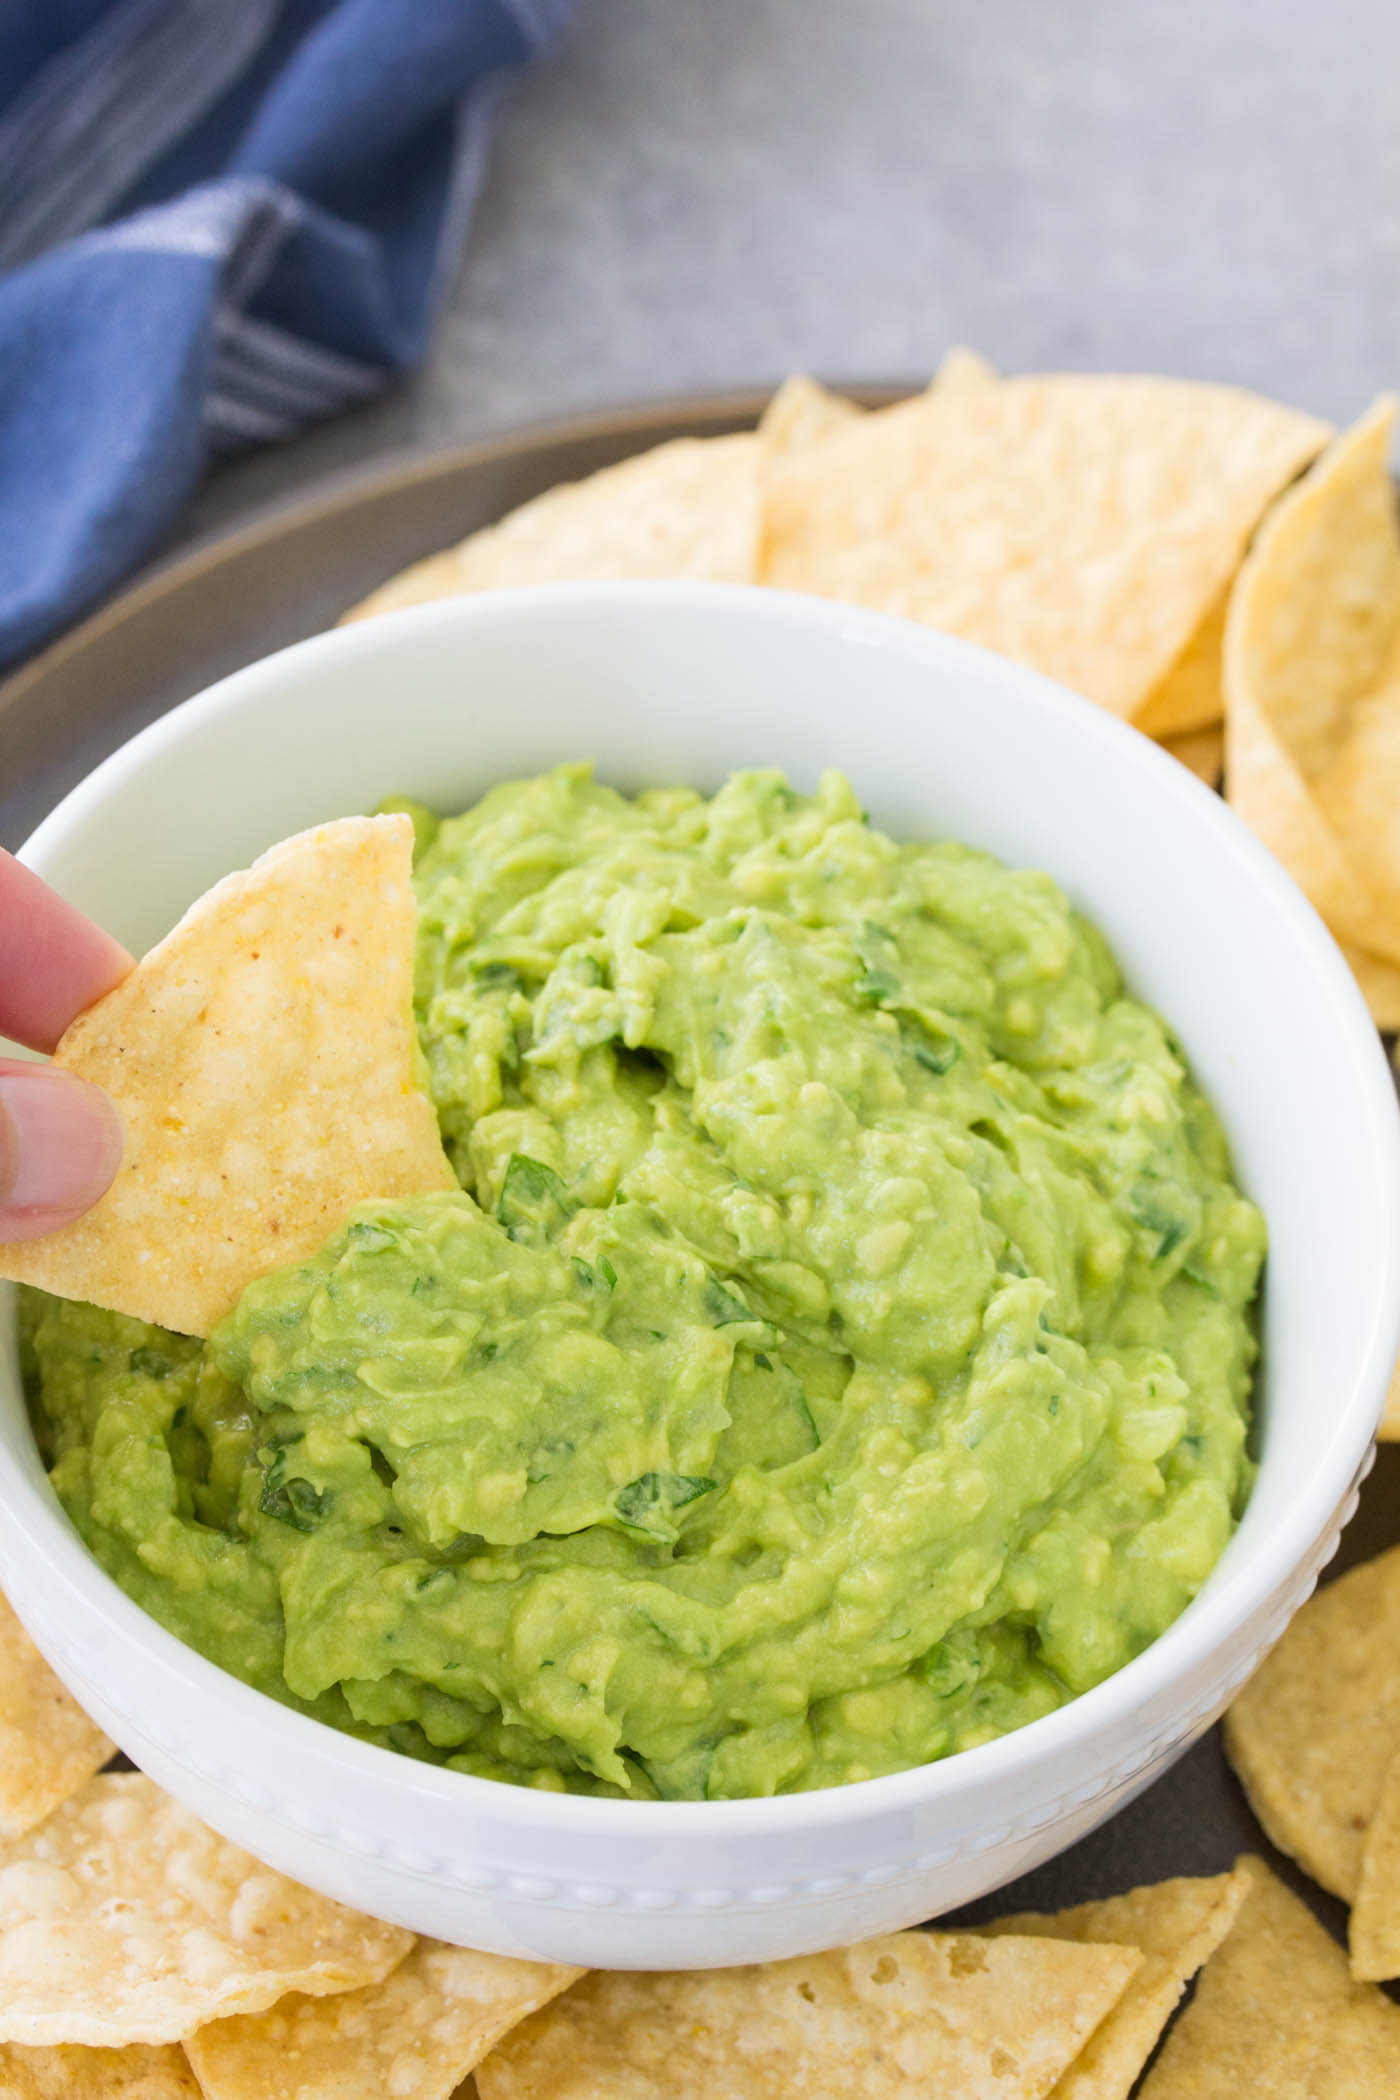 Scooping guacamole with a tortilla chip.